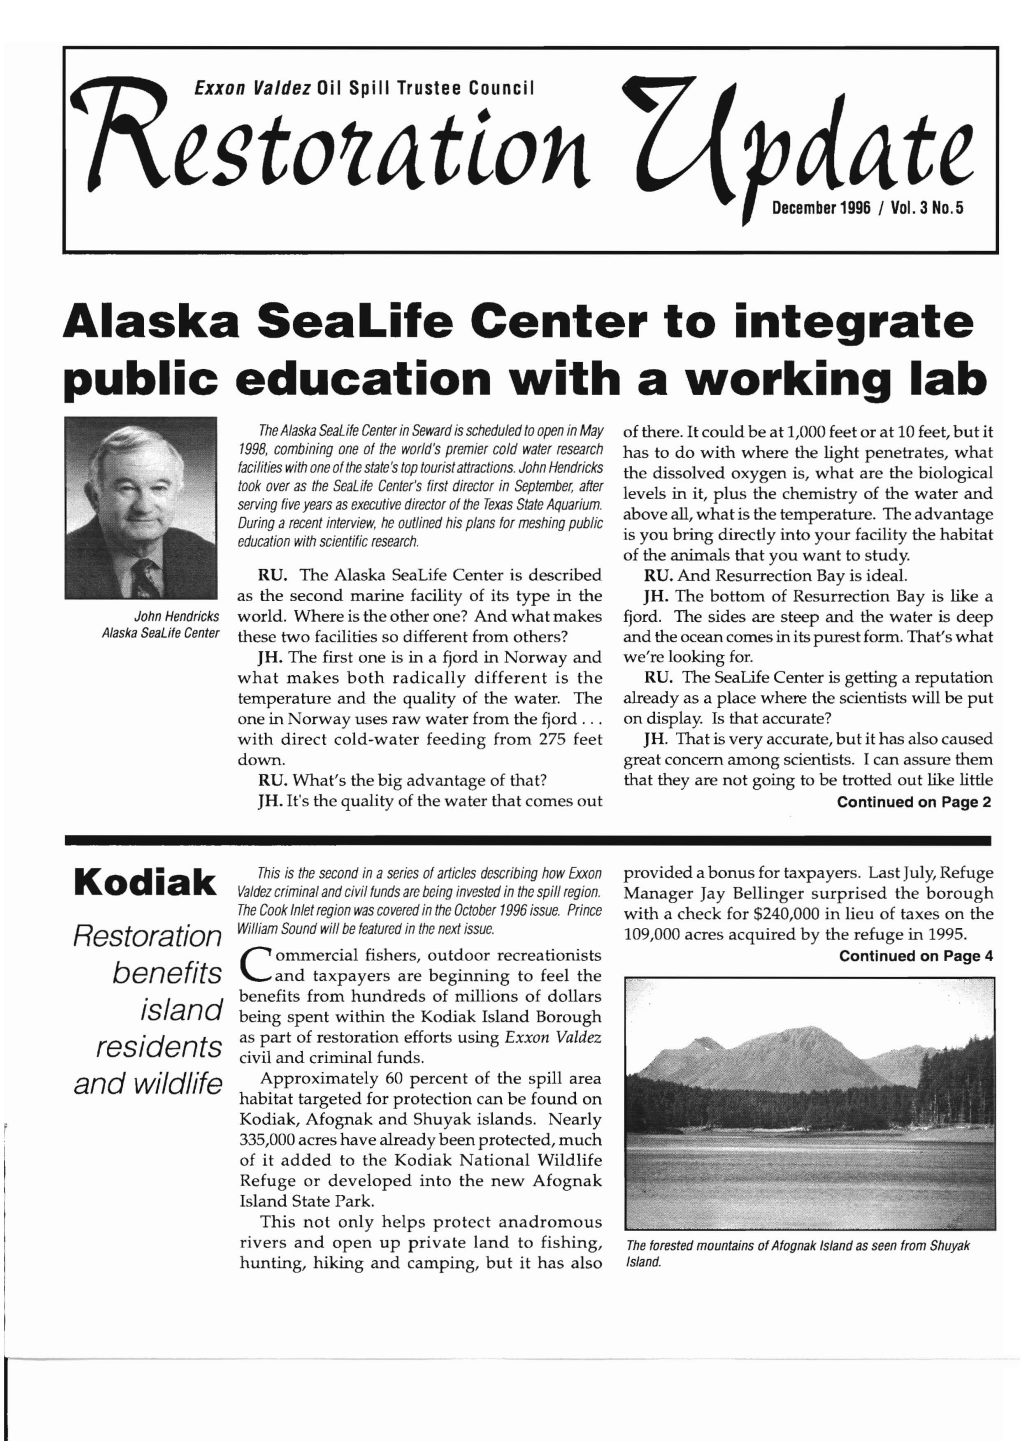 Alaska Sealife Center to Integrate Public Education with a Working Lab